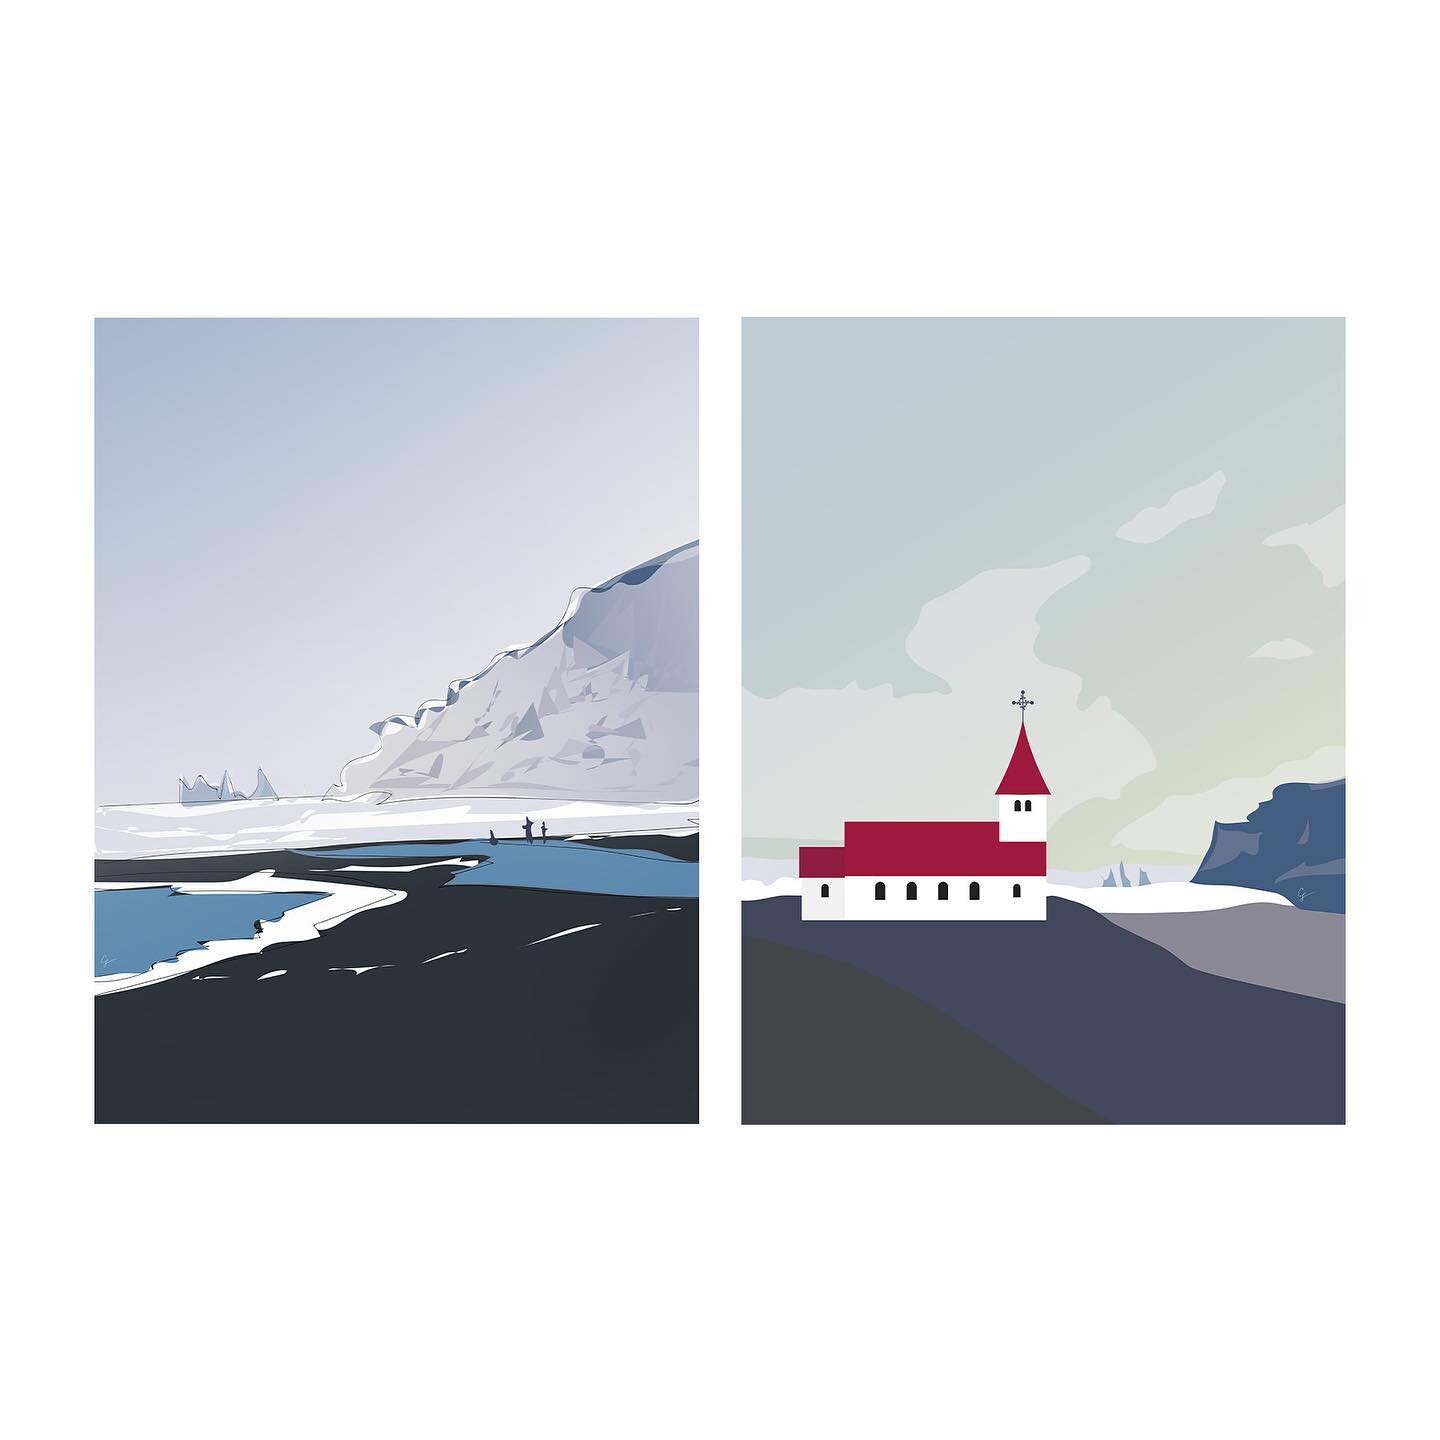 Two are Better than One: Art Print Pairs [ Vik, Iceland 🇮🇸 - Banff National Park, Canada 🇨🇦 - Santorini, Greece 🇬🇷 ]